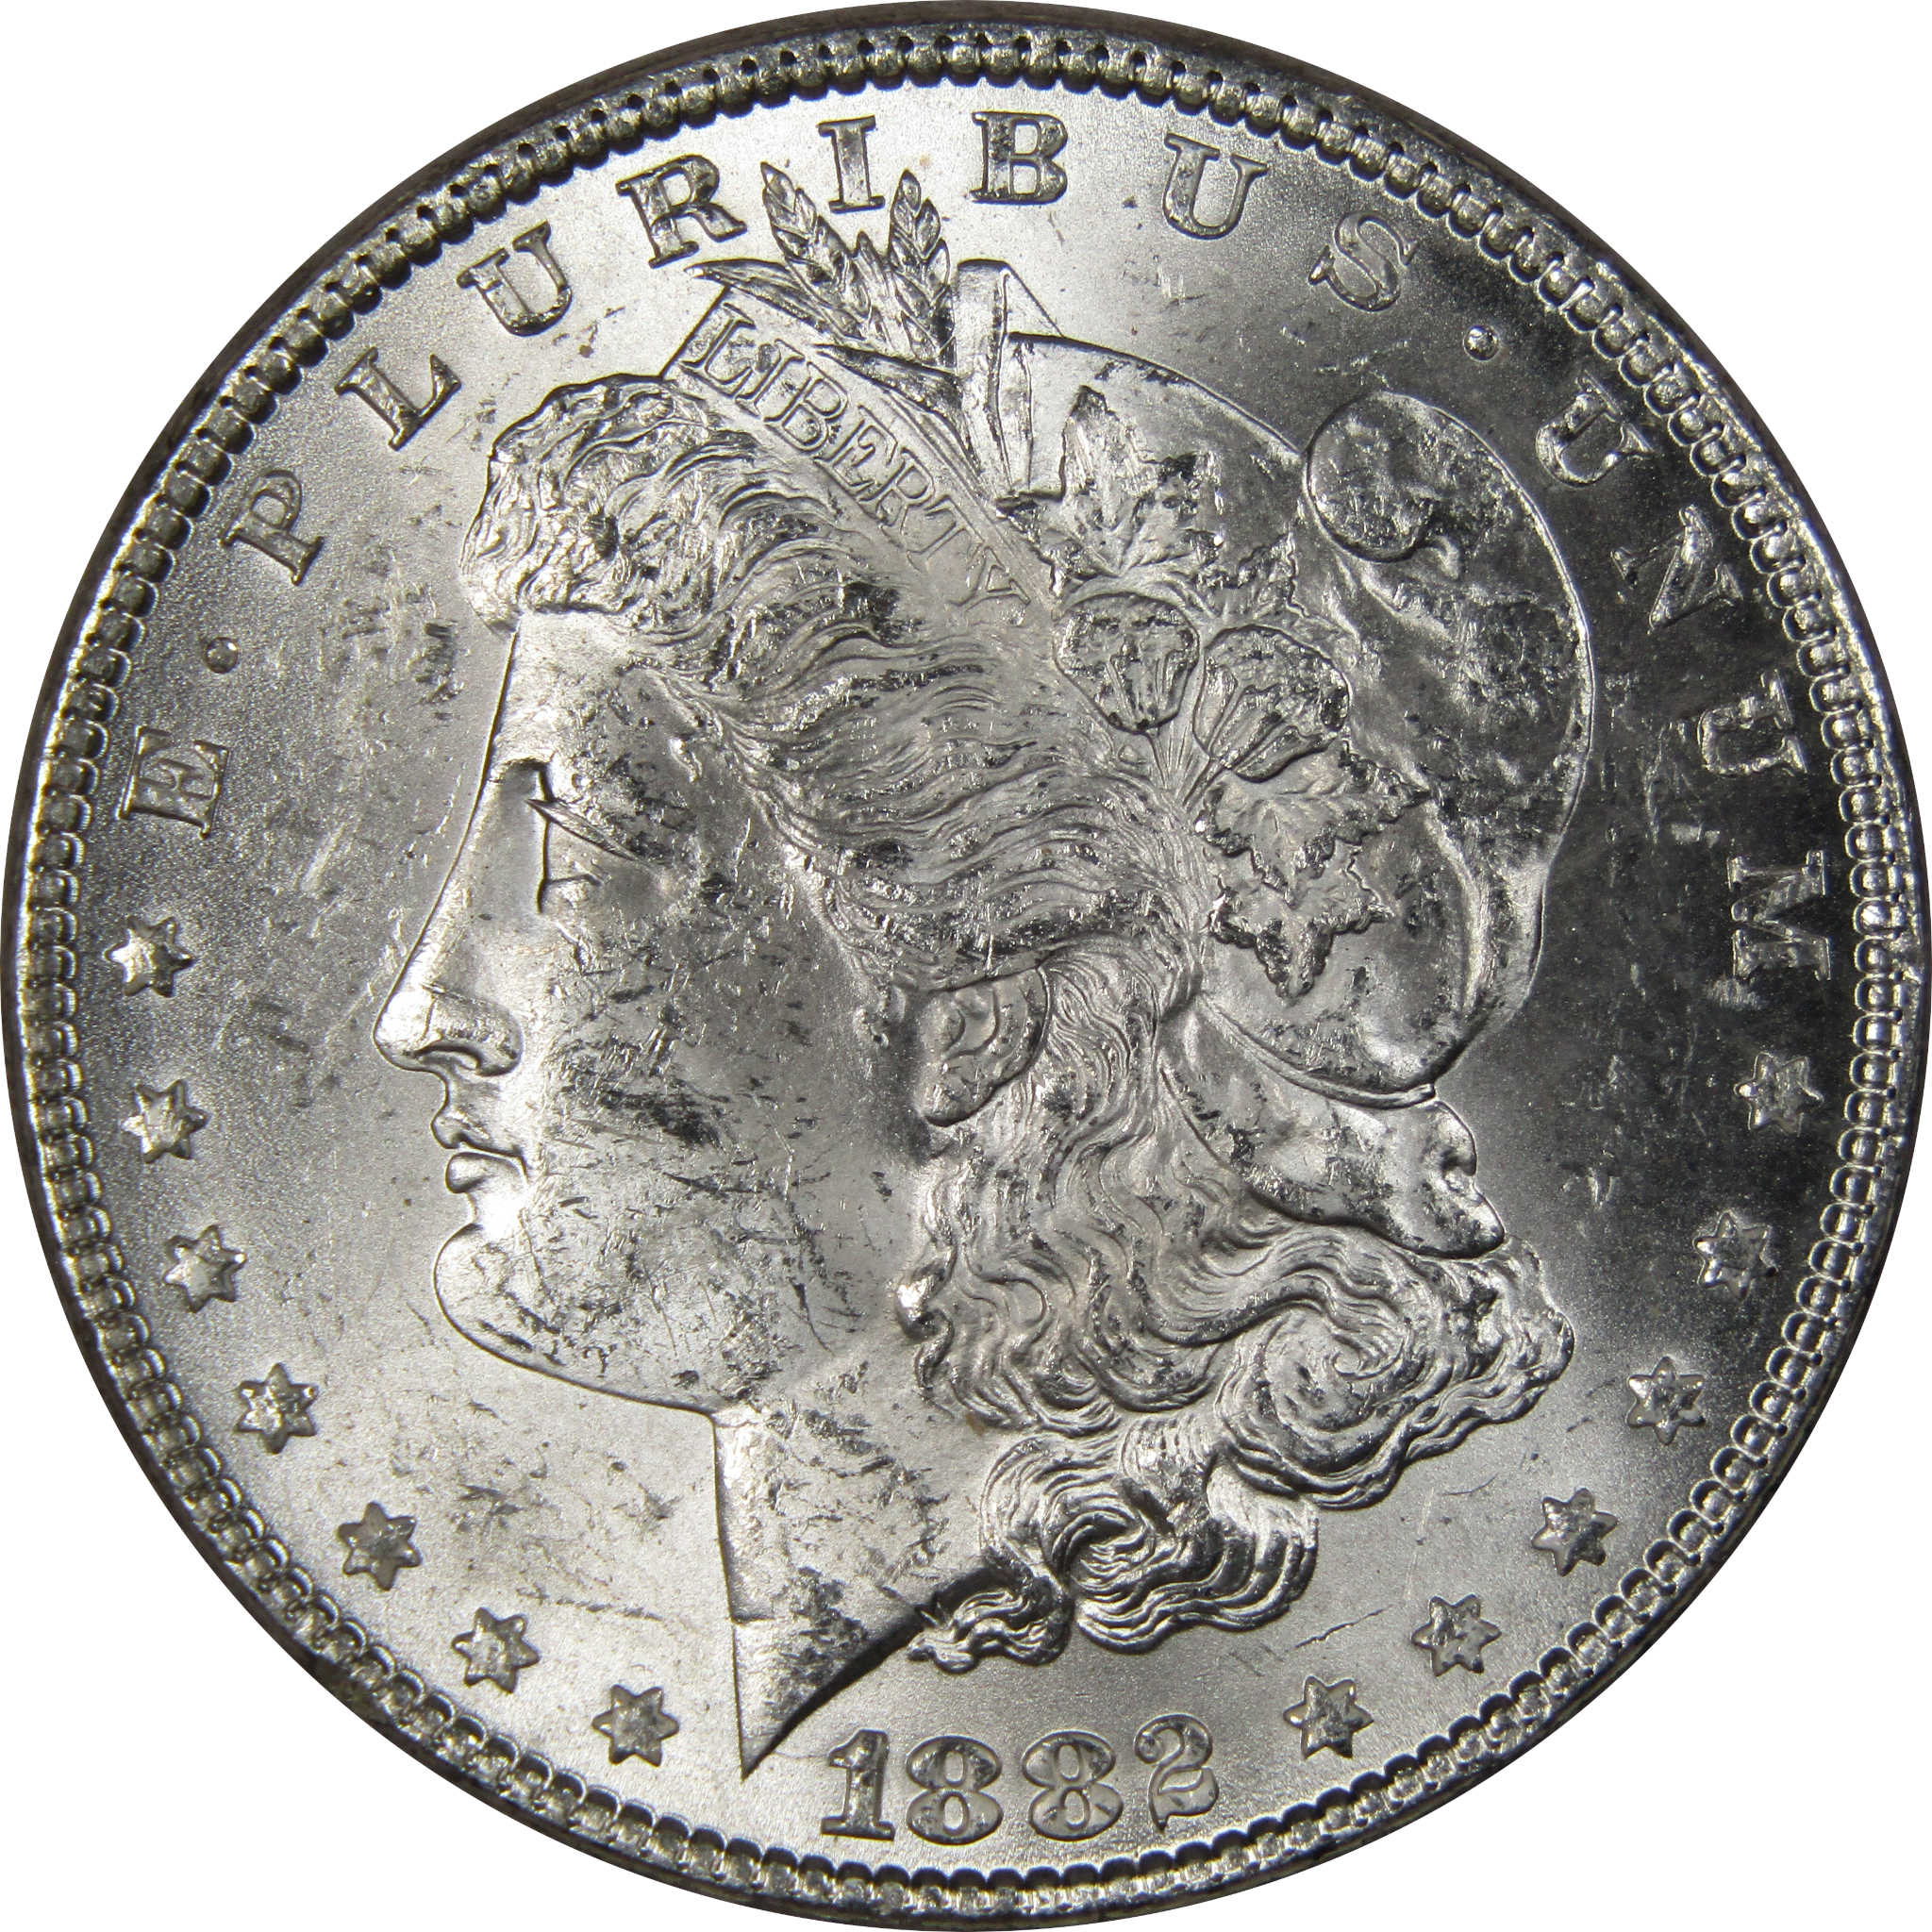 1882 Morgan Dollar BU Uncirculated Mint State 90% Silver SKU:IPC9715 - Morgan coin - Morgan silver dollar - Morgan silver dollar for sale - Profile Coins &amp; Collectibles